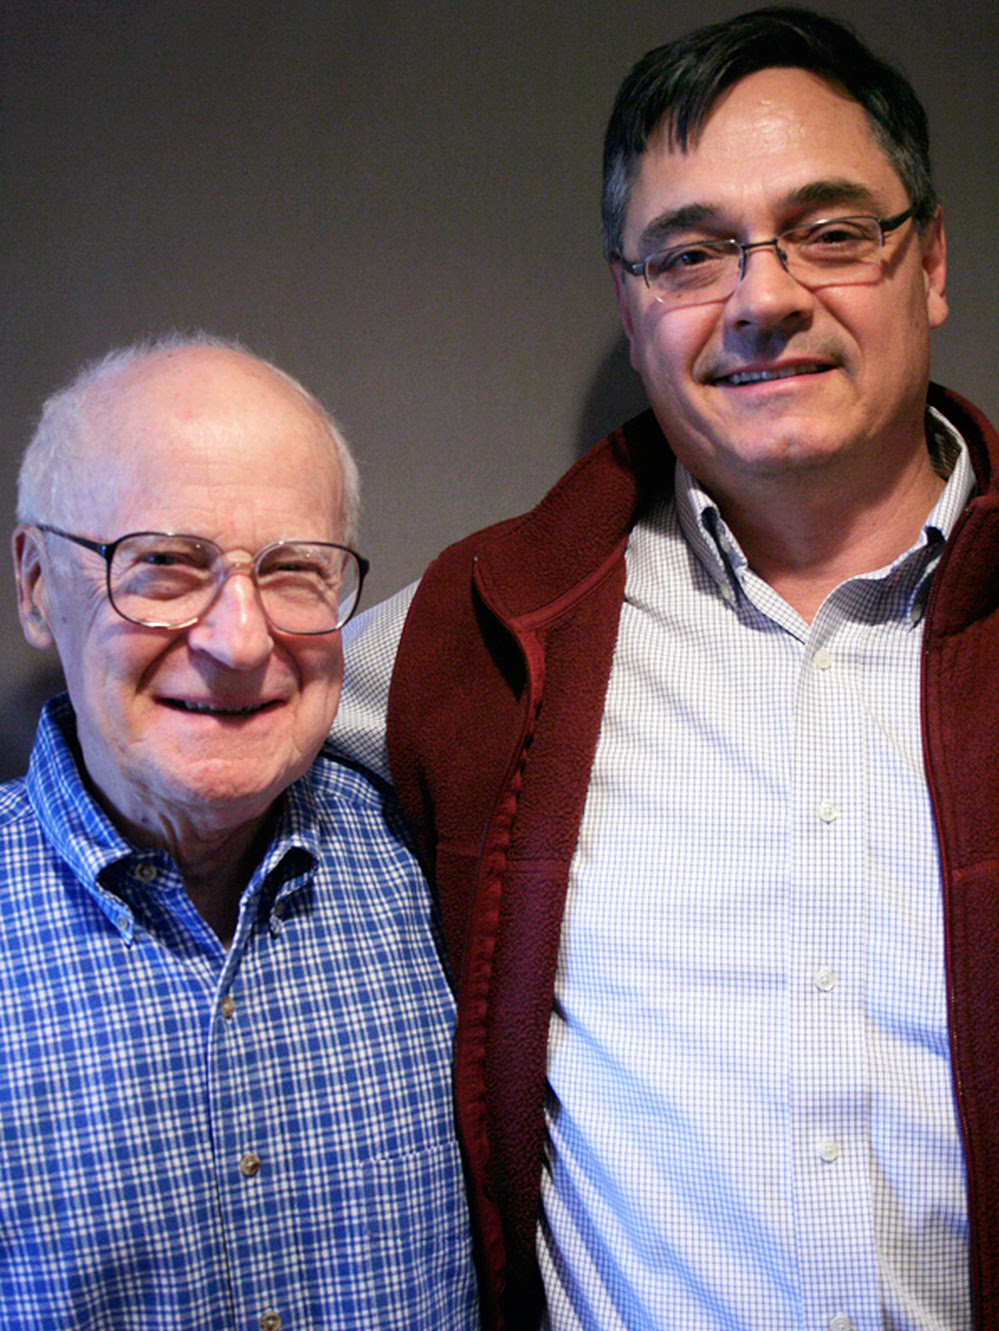 "For me, dying — it's very enlightening and certainly rewarding," David Plant (left) tells Frank Lilley. "Look at the opportunity to talk, for example. It's just incredible."